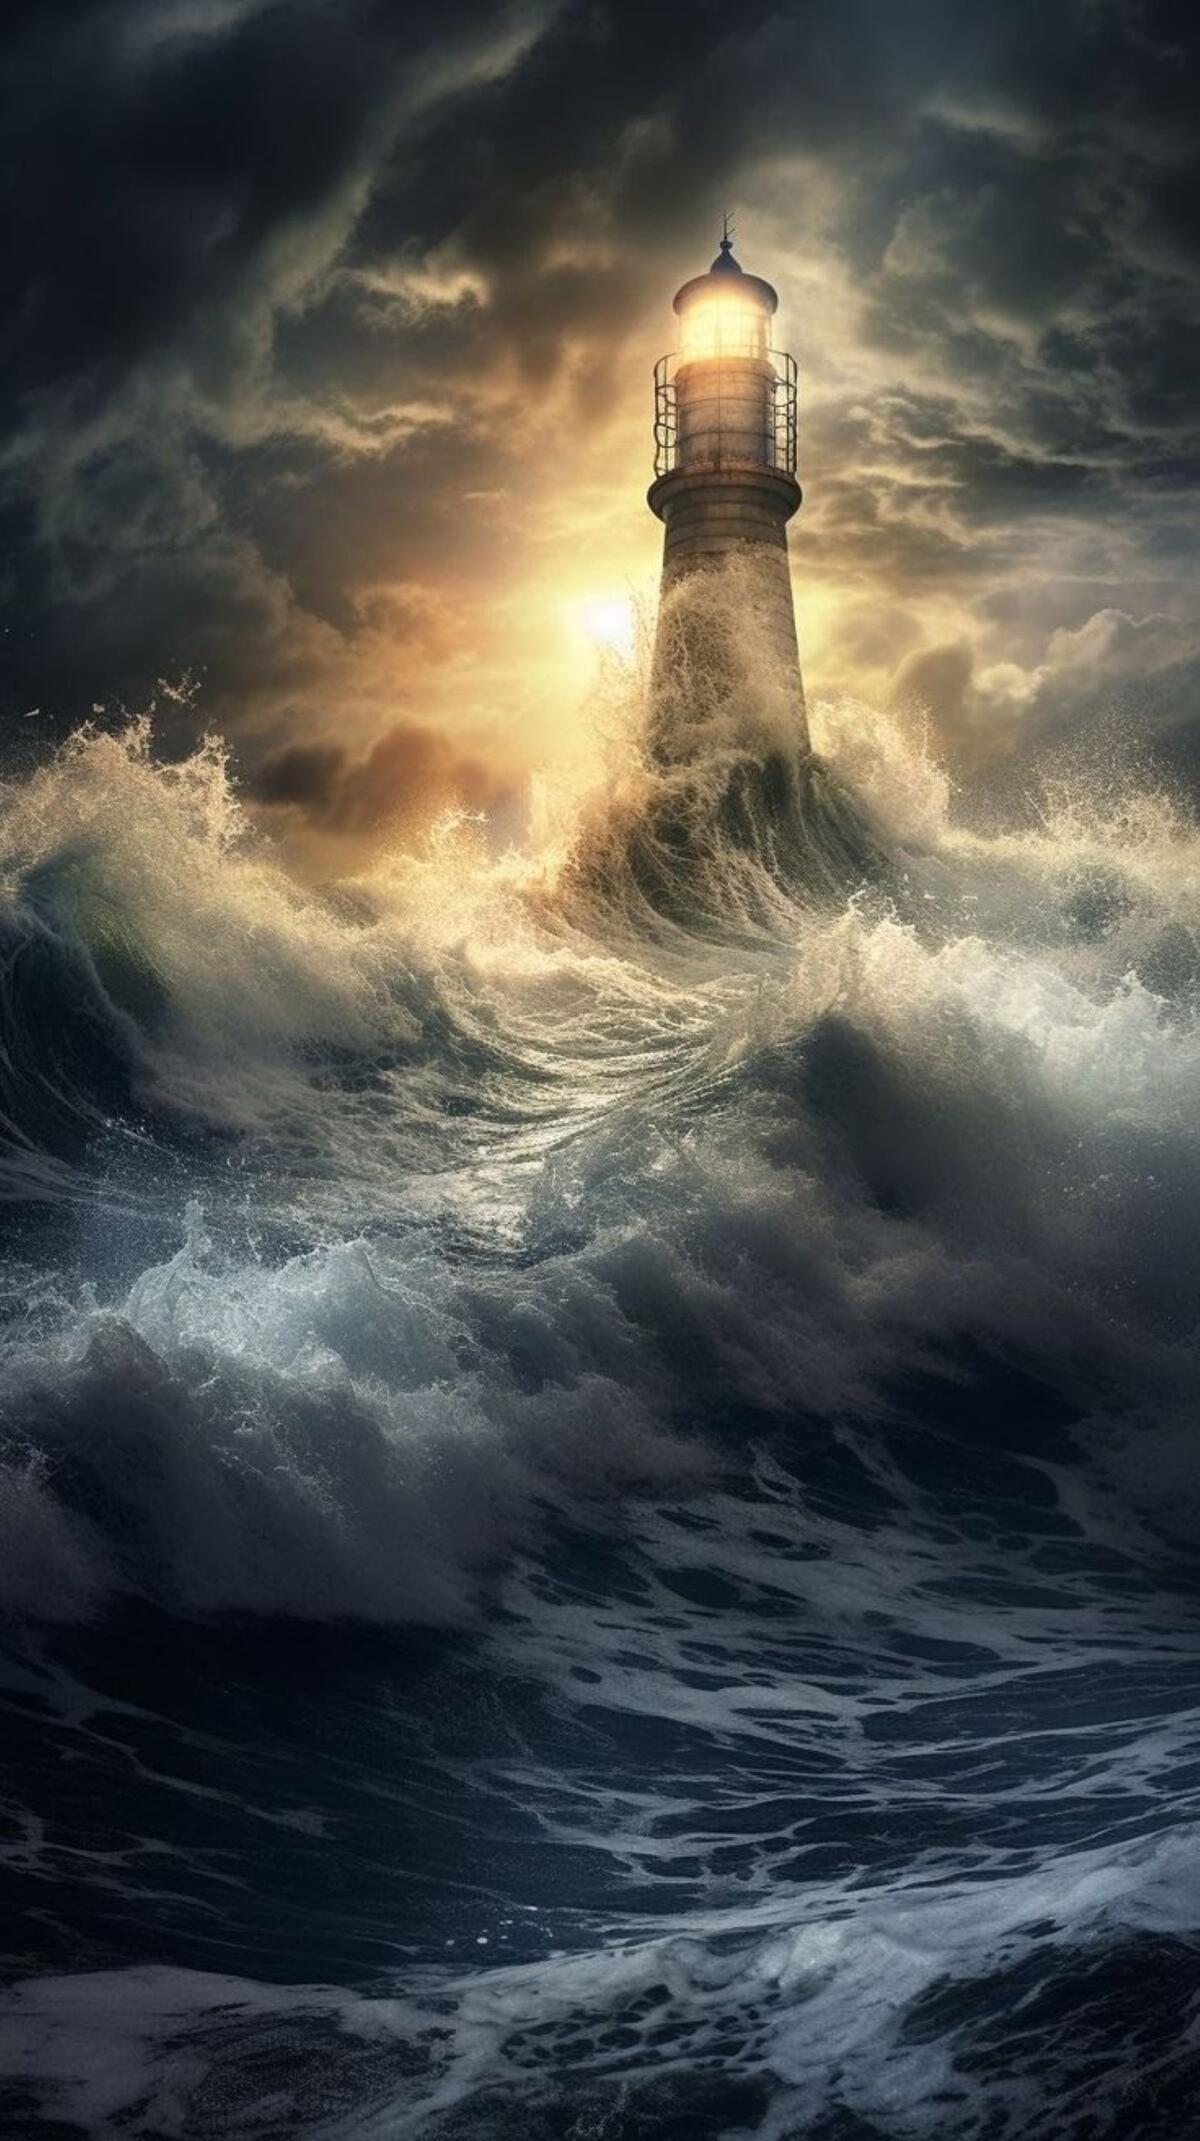 A lighthouse in a raging ocean